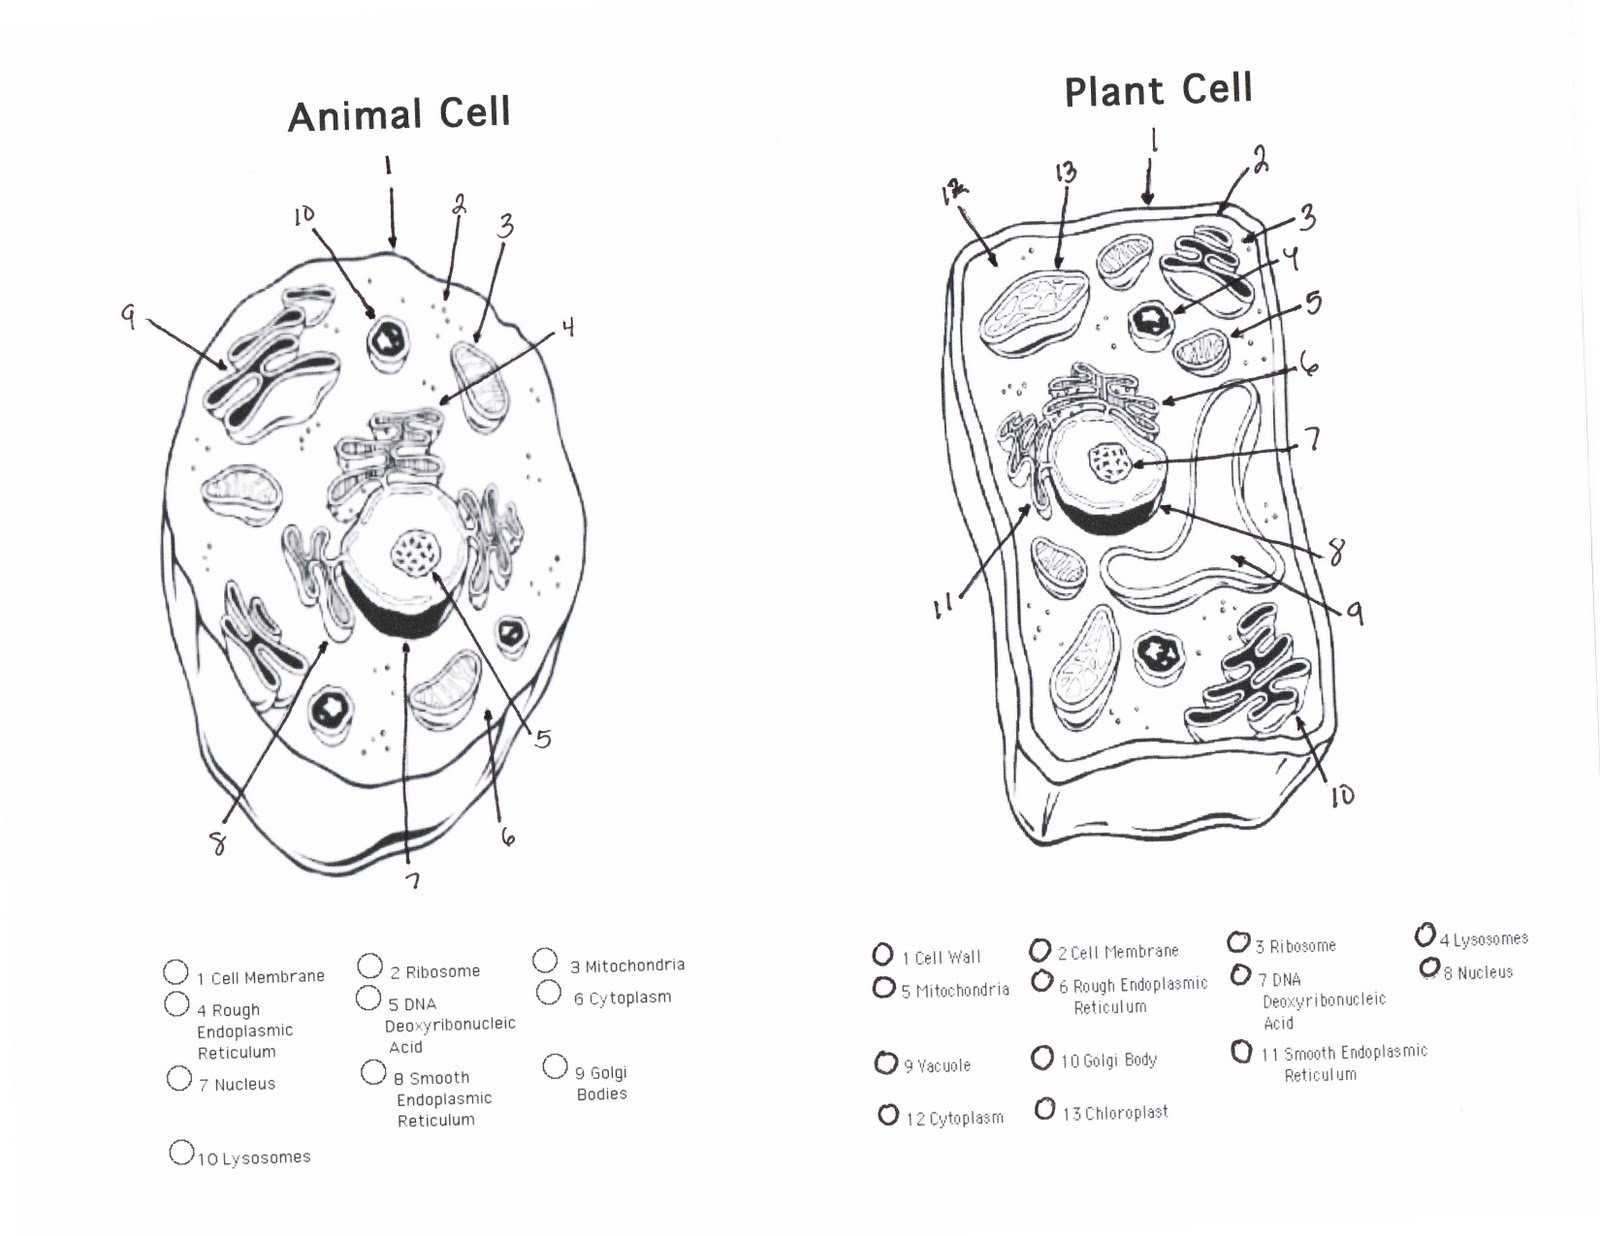 Plant Cell Worksheet Answers with Eukaryotic Cells Diagram New Diagram A Plant Cell thearchivast